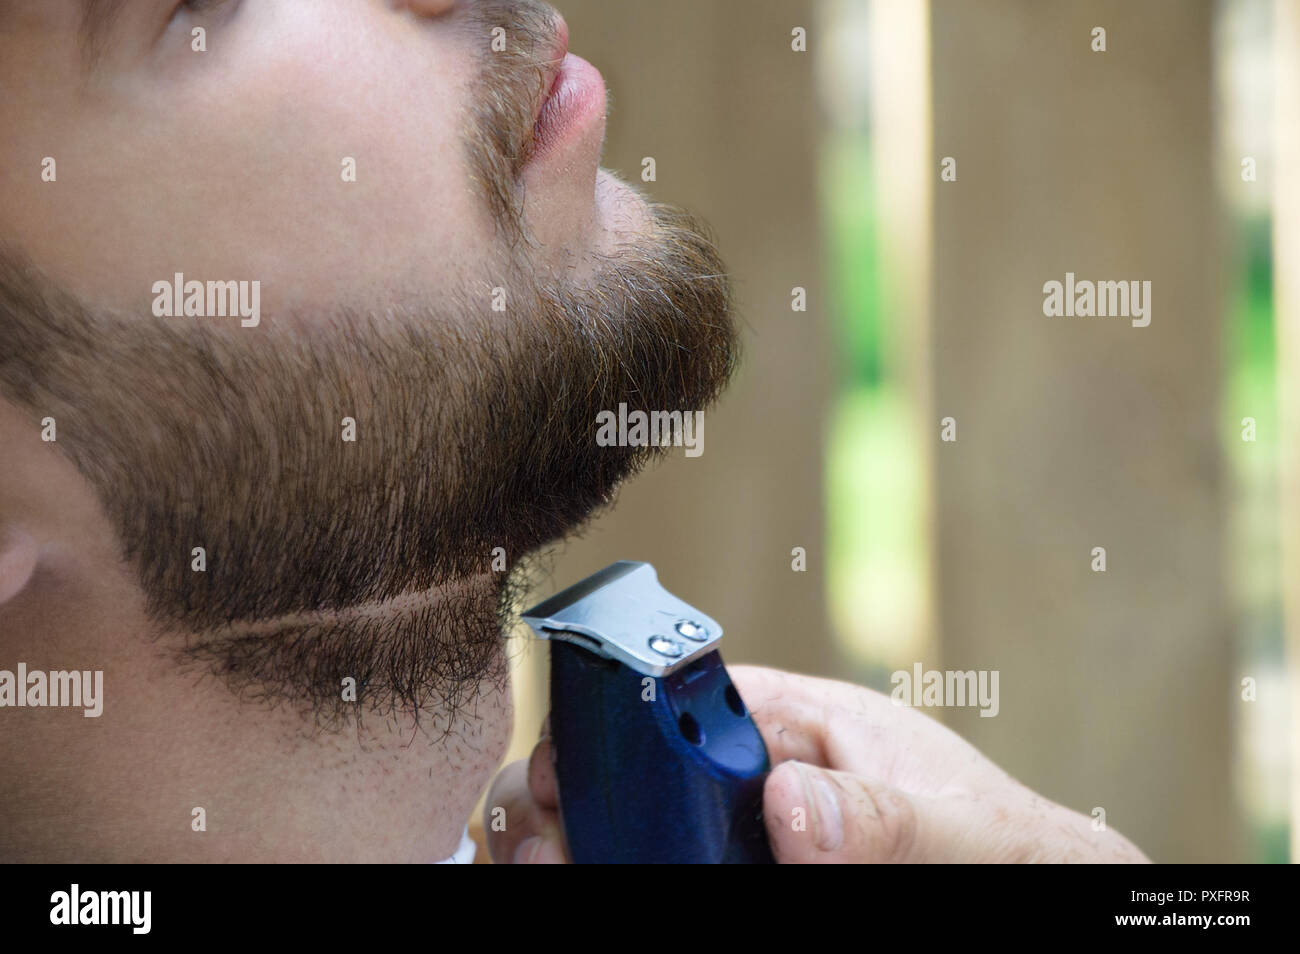 shaving with a trimmer